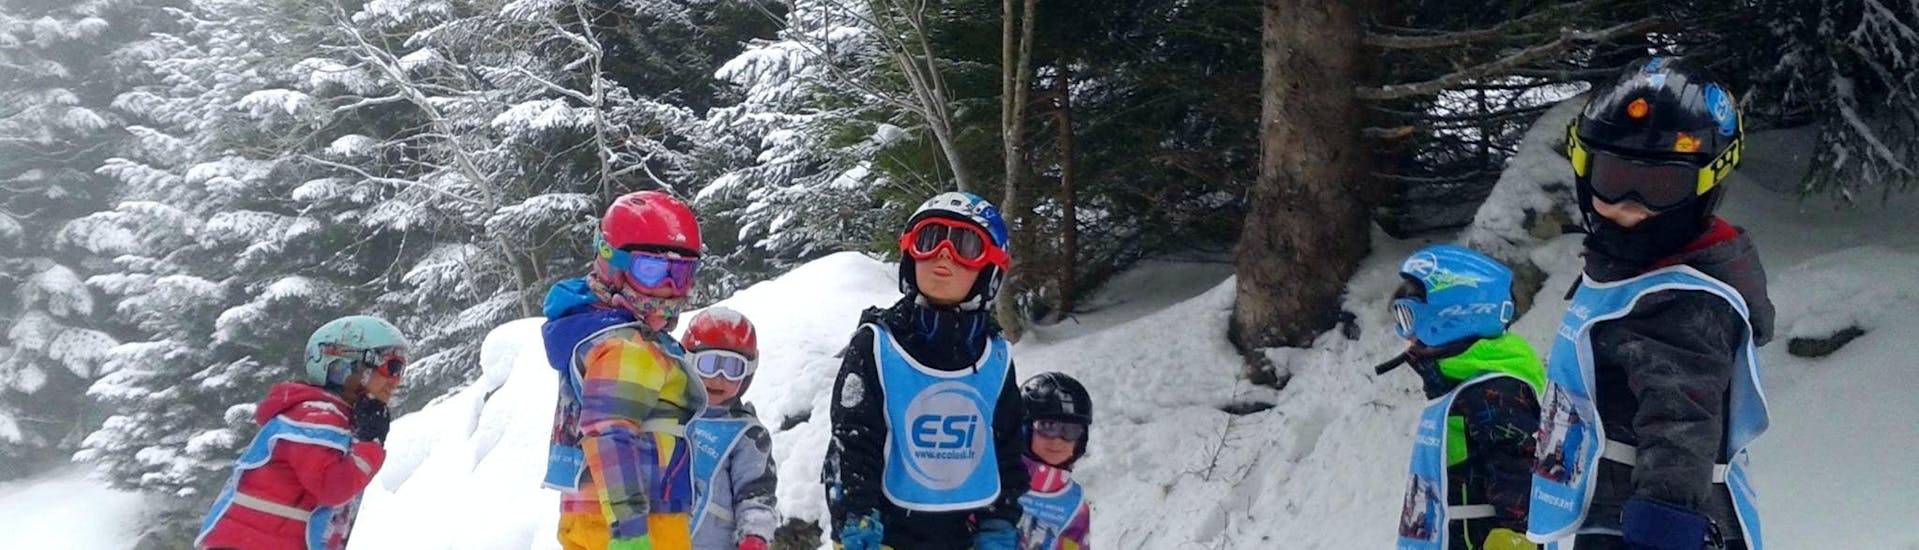 Kids are standing in the middle of the slopes surrounded by trees during their Kids Ski Lessons (5-15 years) - Afternoon - Beginner with the ski school ESI Ecoloski Barèges.